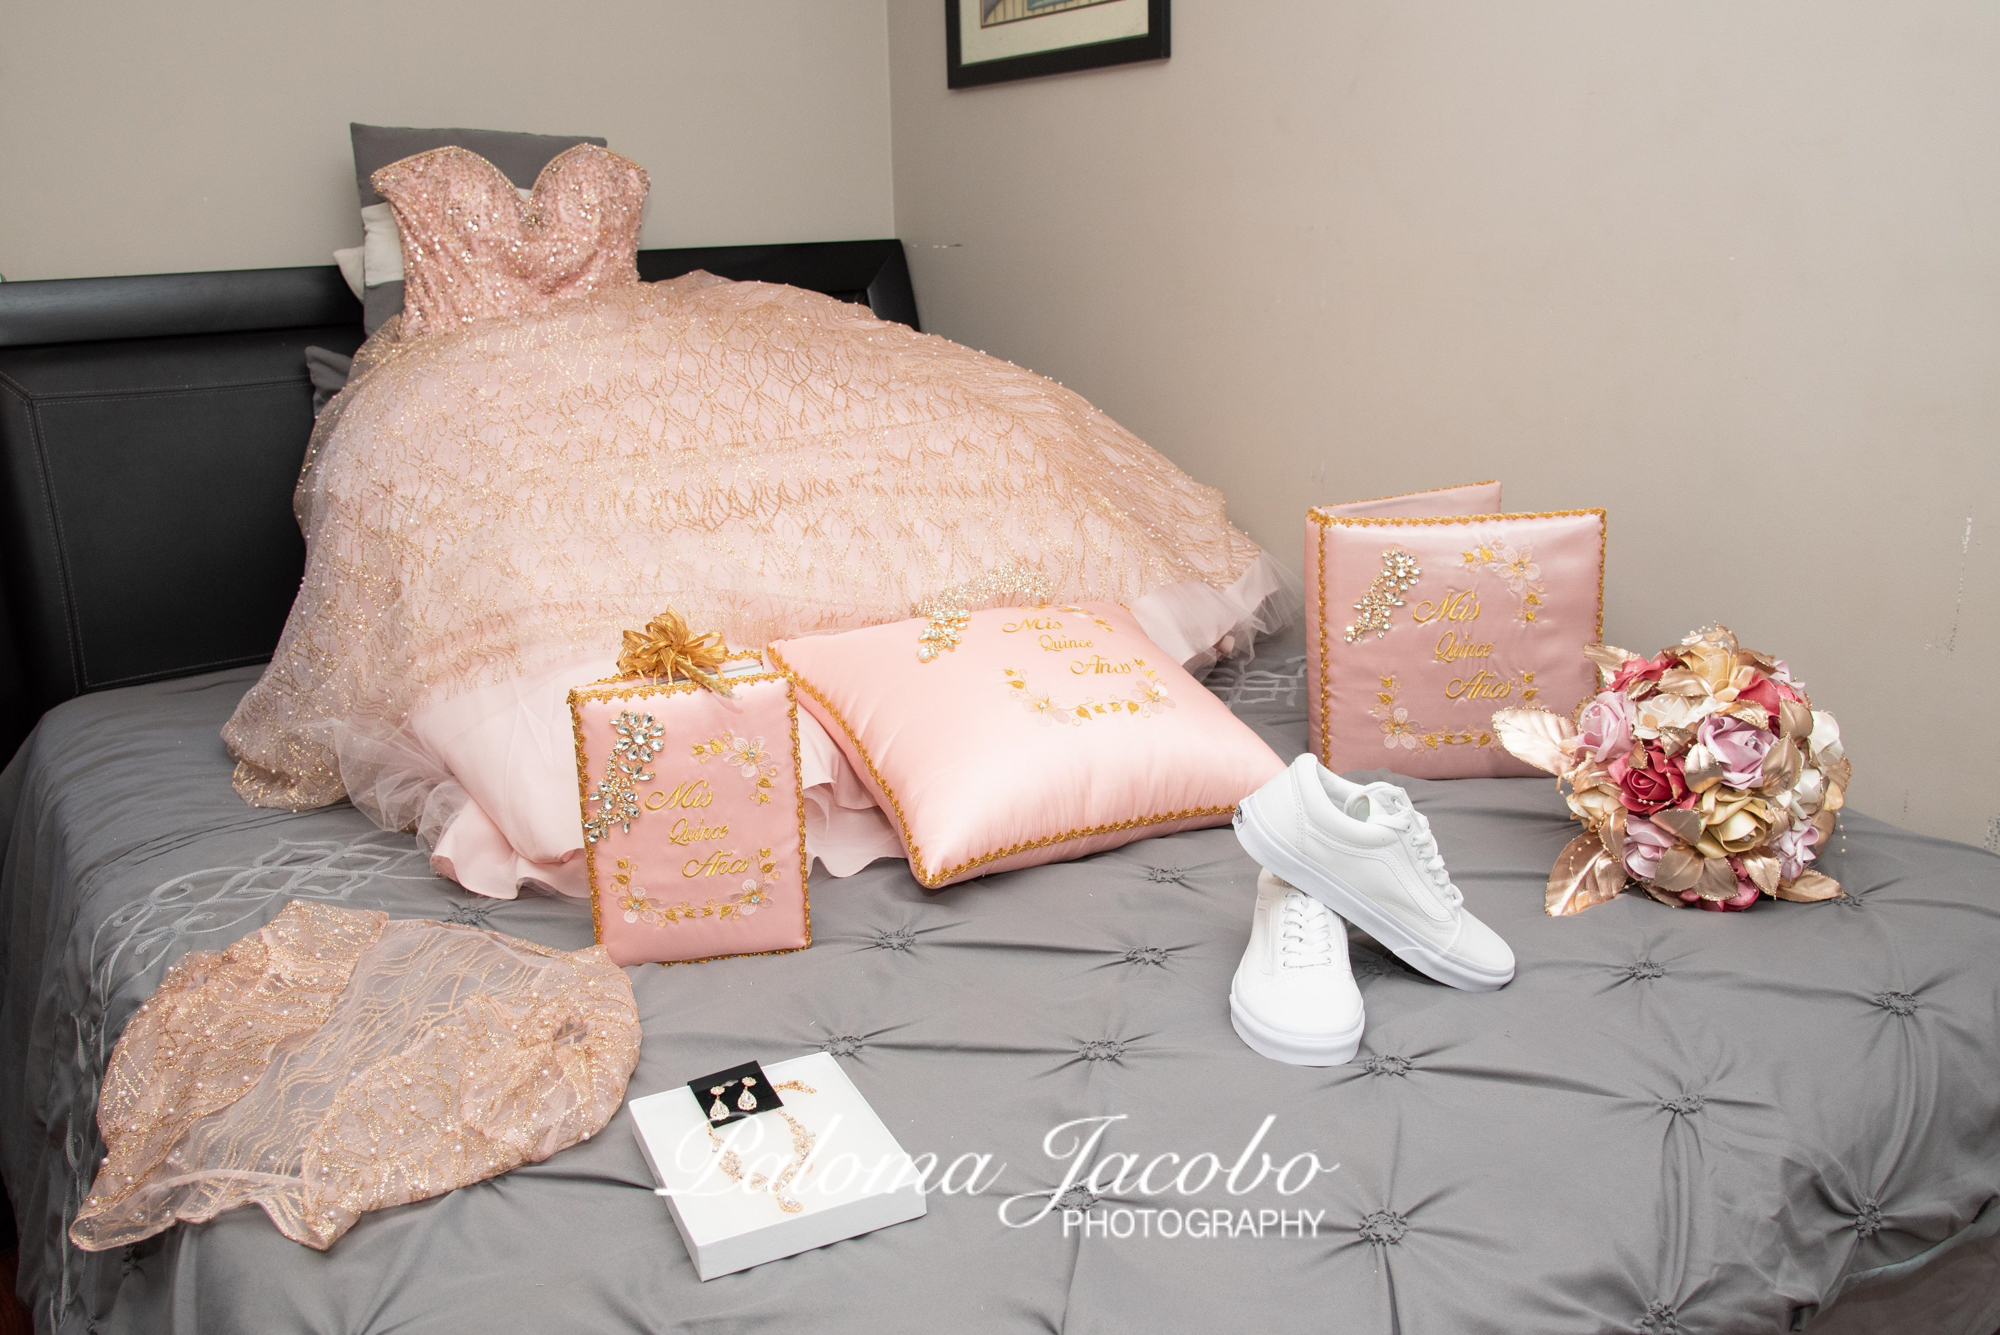 Quinceanera accessories by Paloma Jacobo Photography